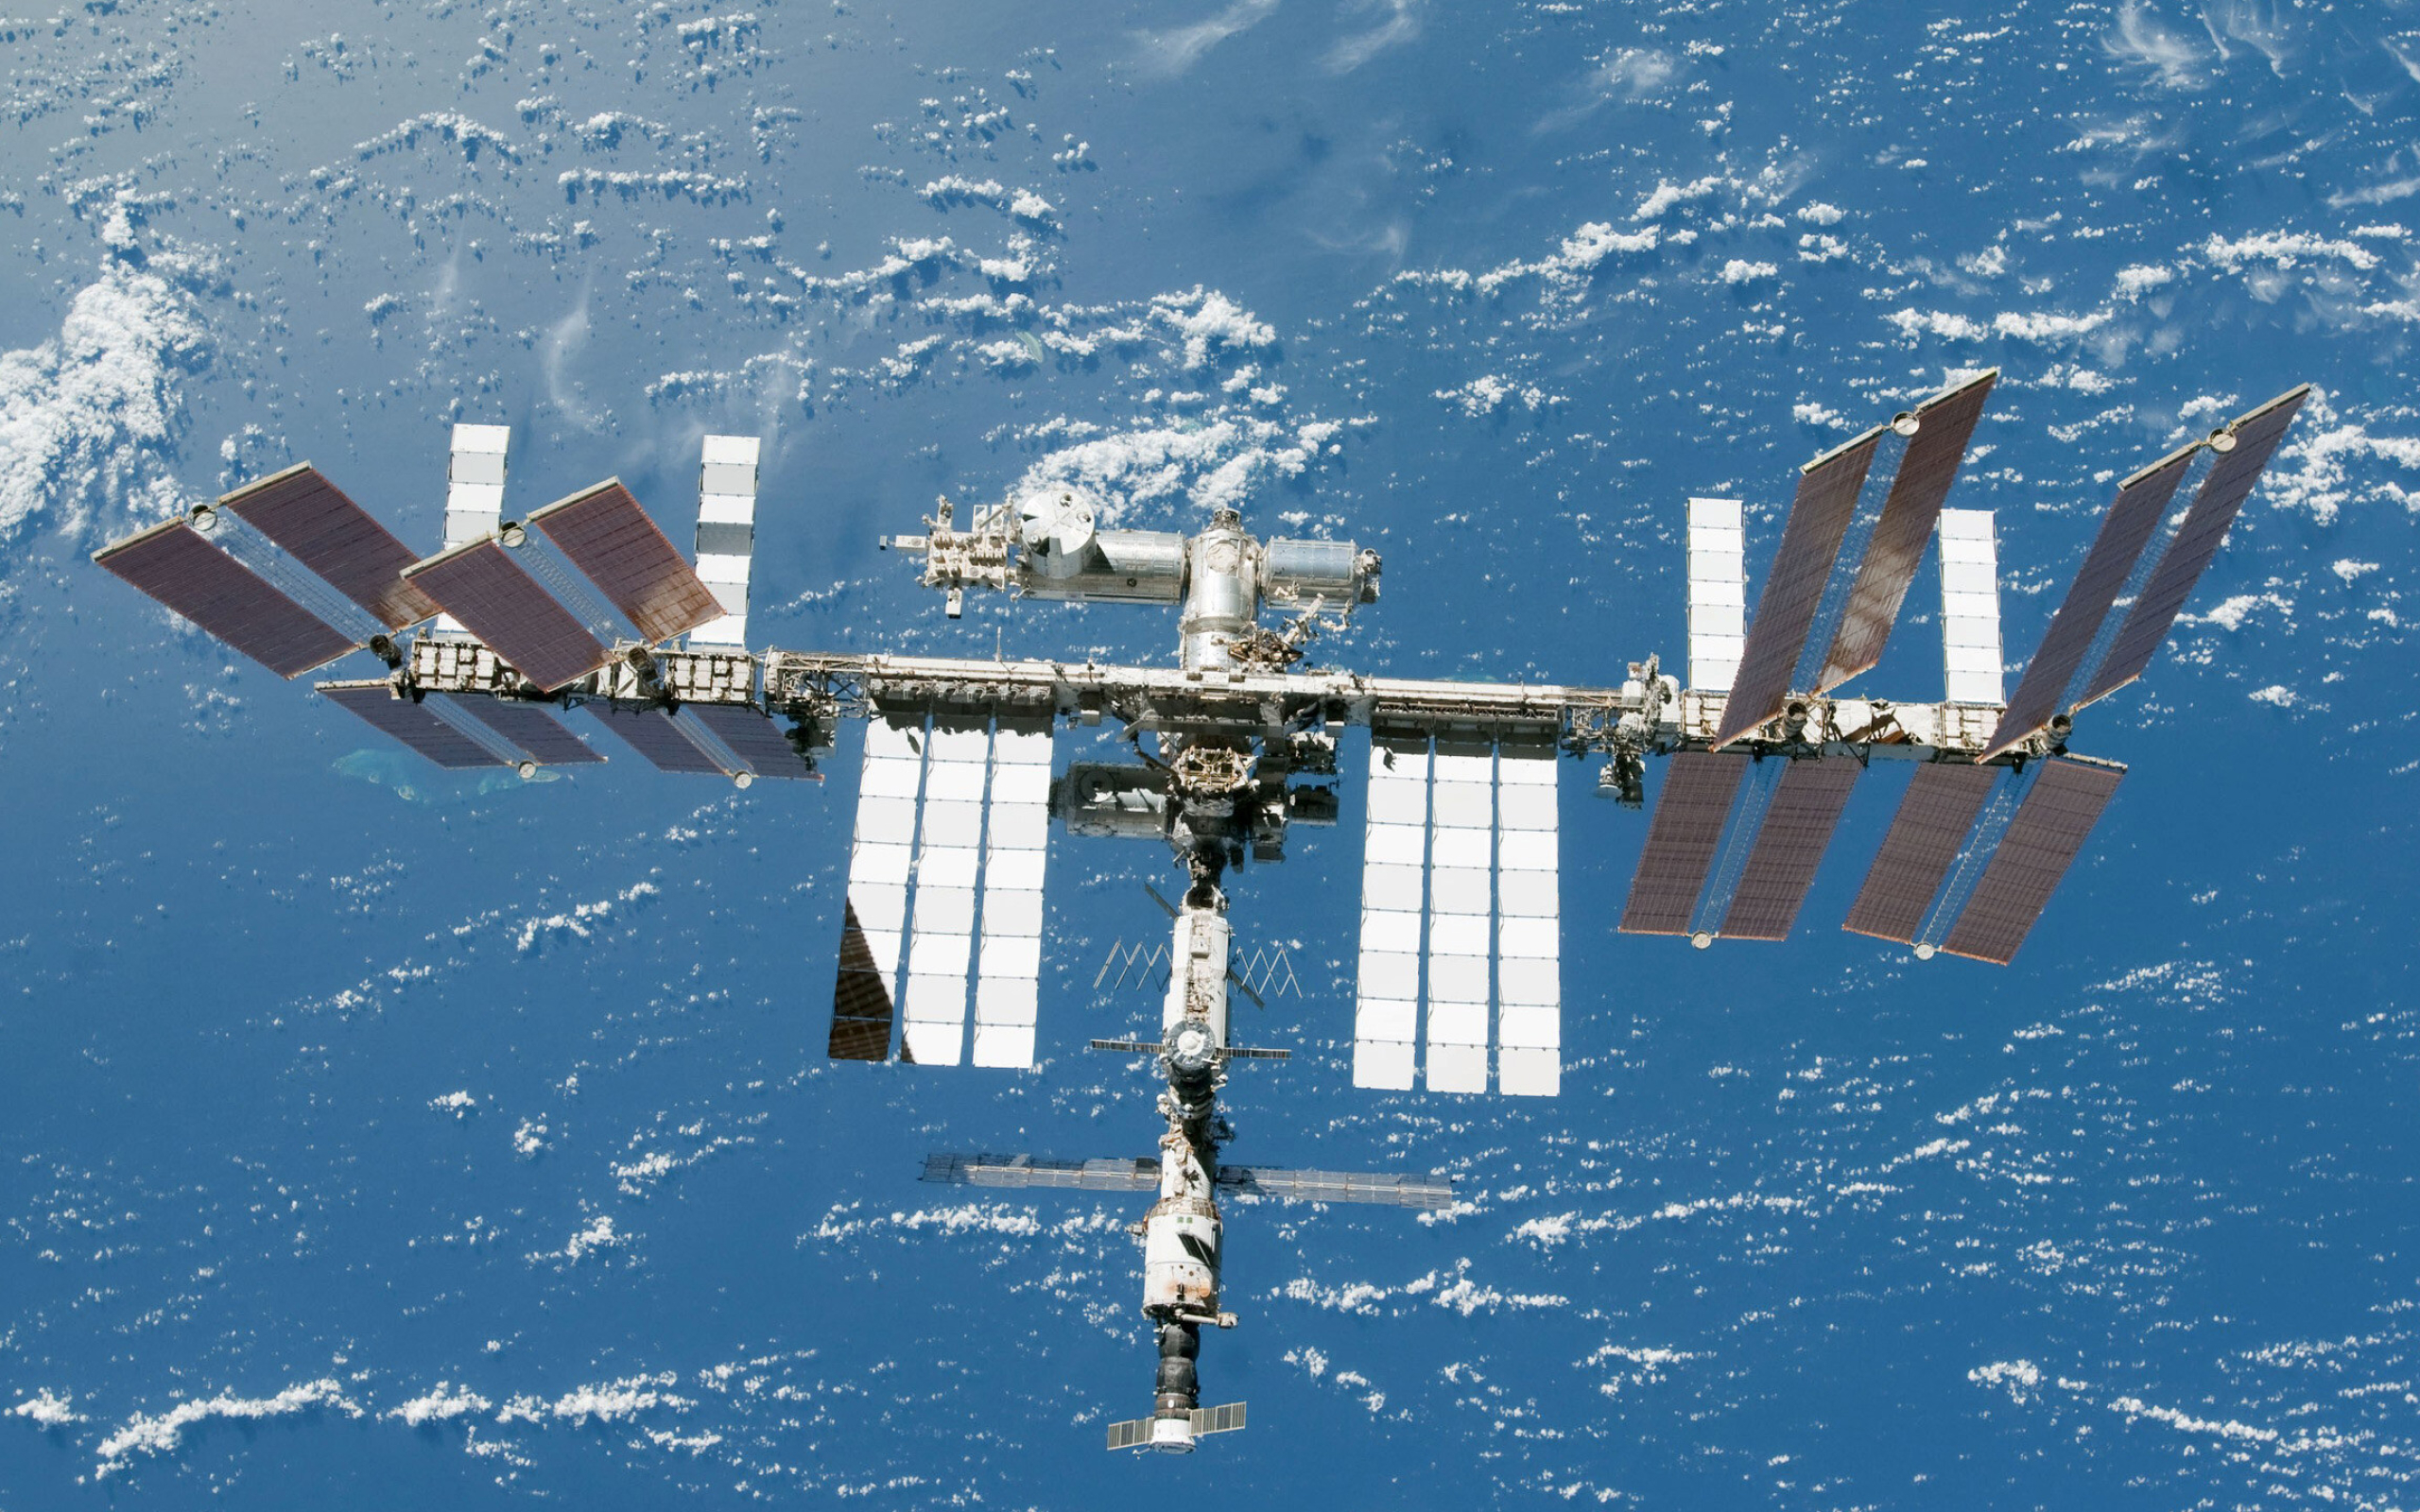 ISS: International Space Station, Maintains an orbit with an average altitude of 250 miles. 2560x1600 HD Wallpaper.